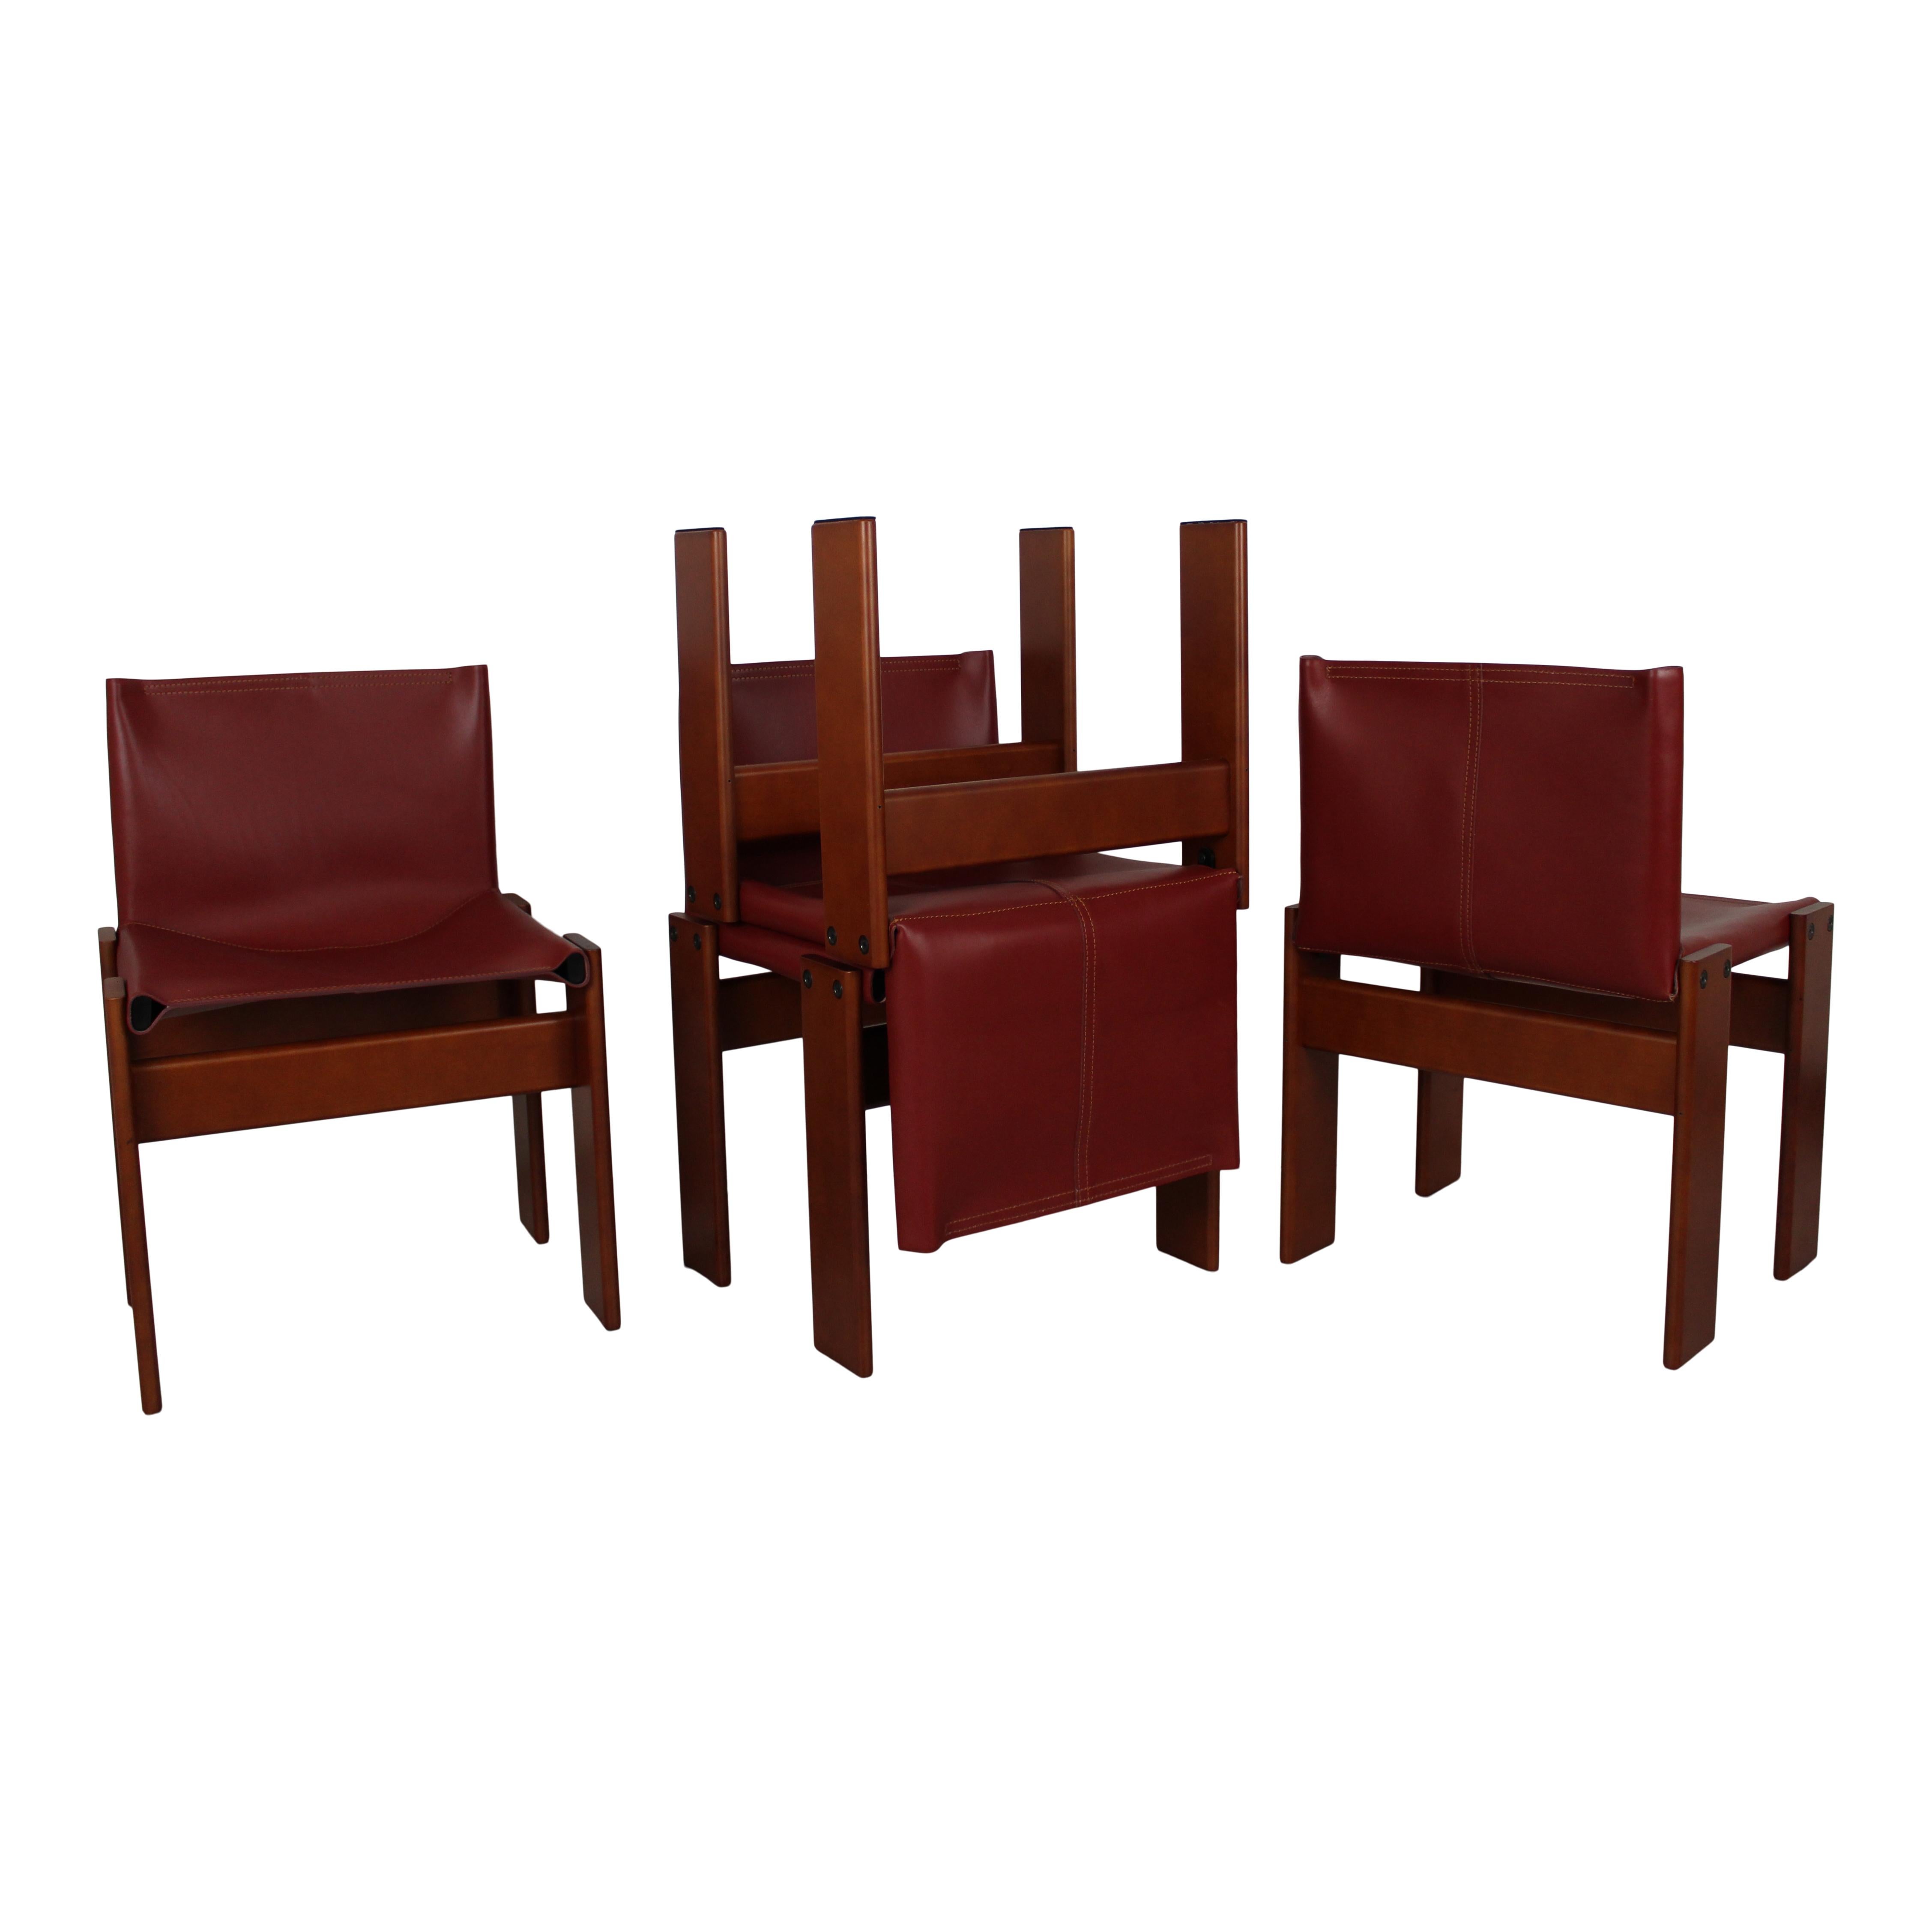 Afra & Tobia Scarpa English Red  Leather Monk Dining Chair for Molteni, Set of 6 For Sale 4